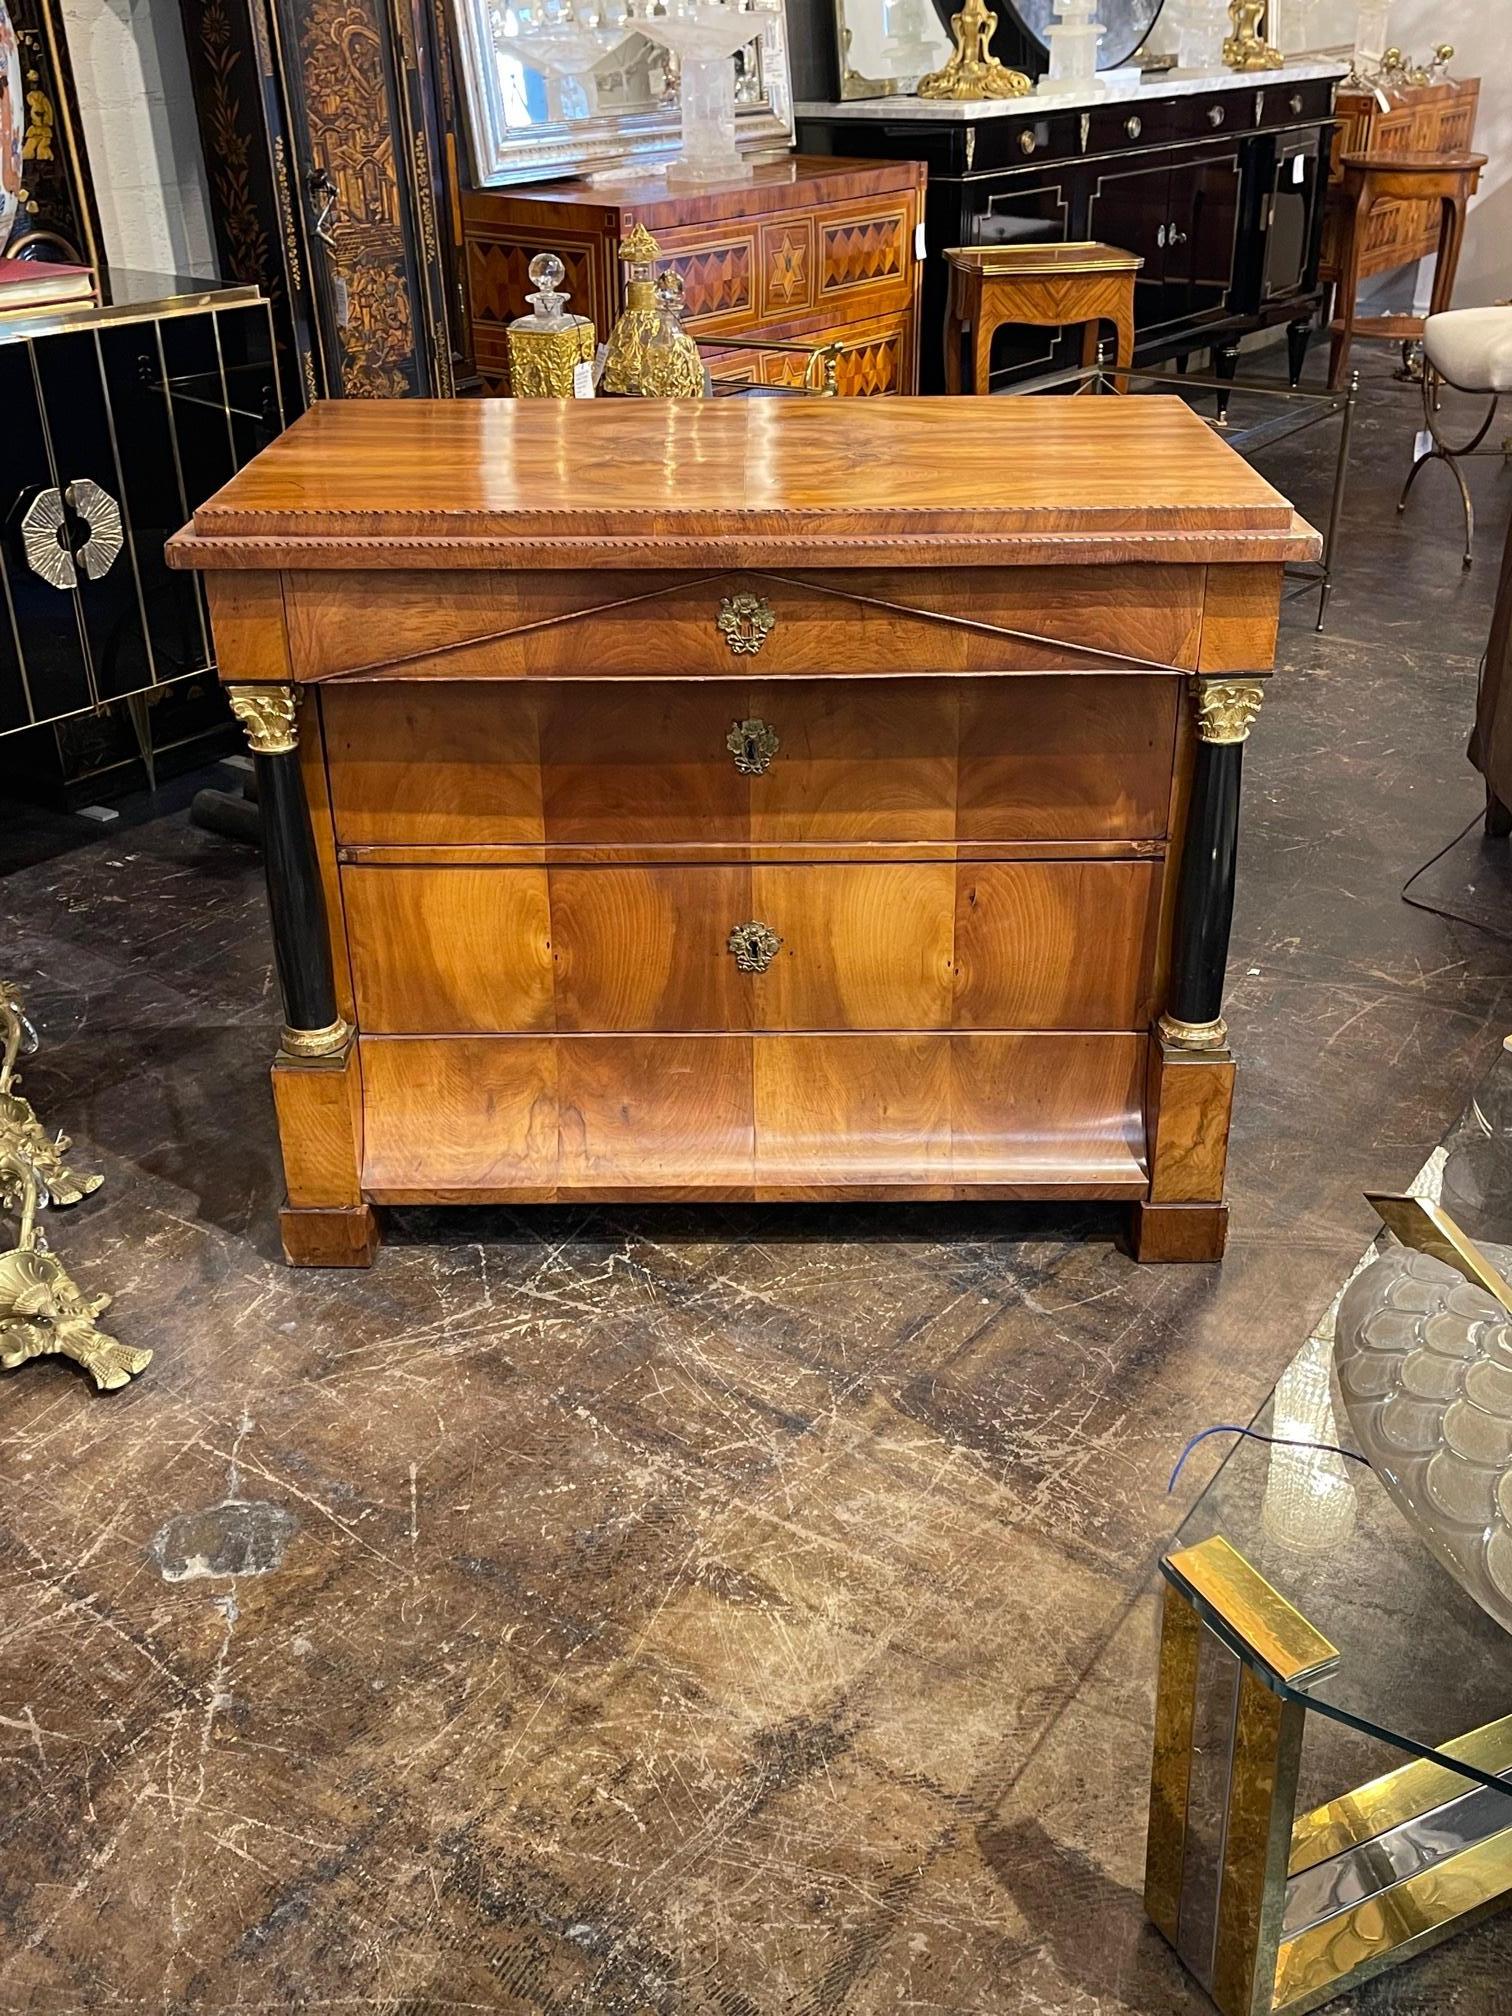 Handsome 19th century German Empire Biedermeier cherry commode with ebonized columns, Circa 1840. This piece has beautiful wood grain and polish. Sure to make a statement.